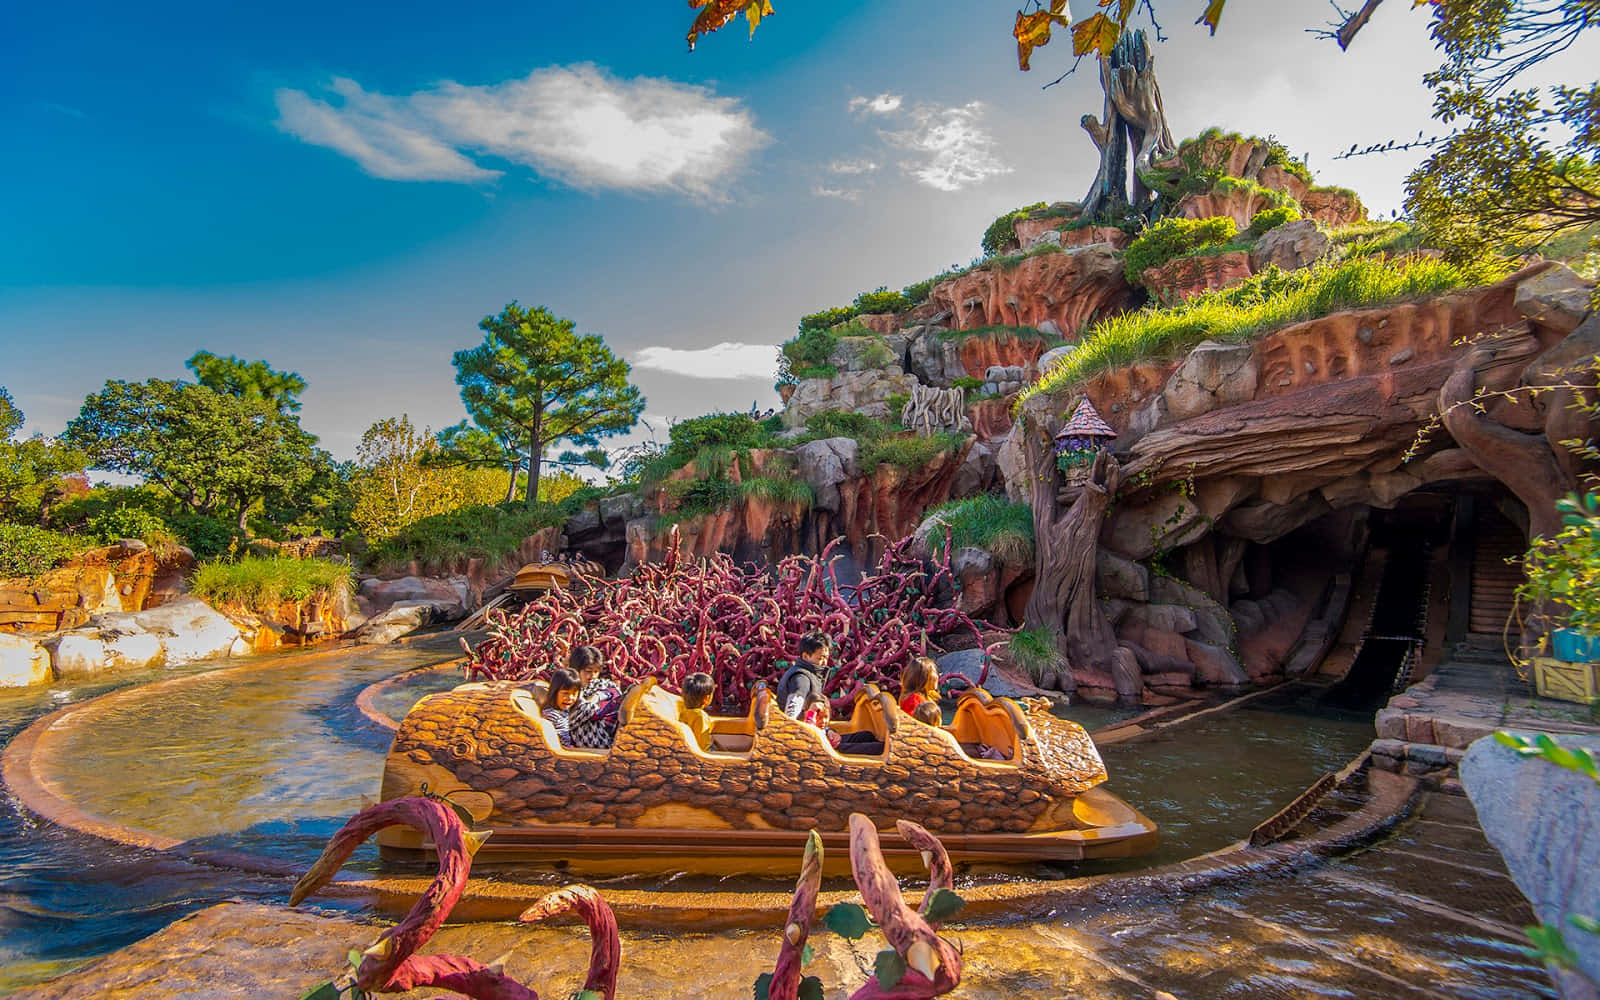 A picturesque view of Splash Mountain